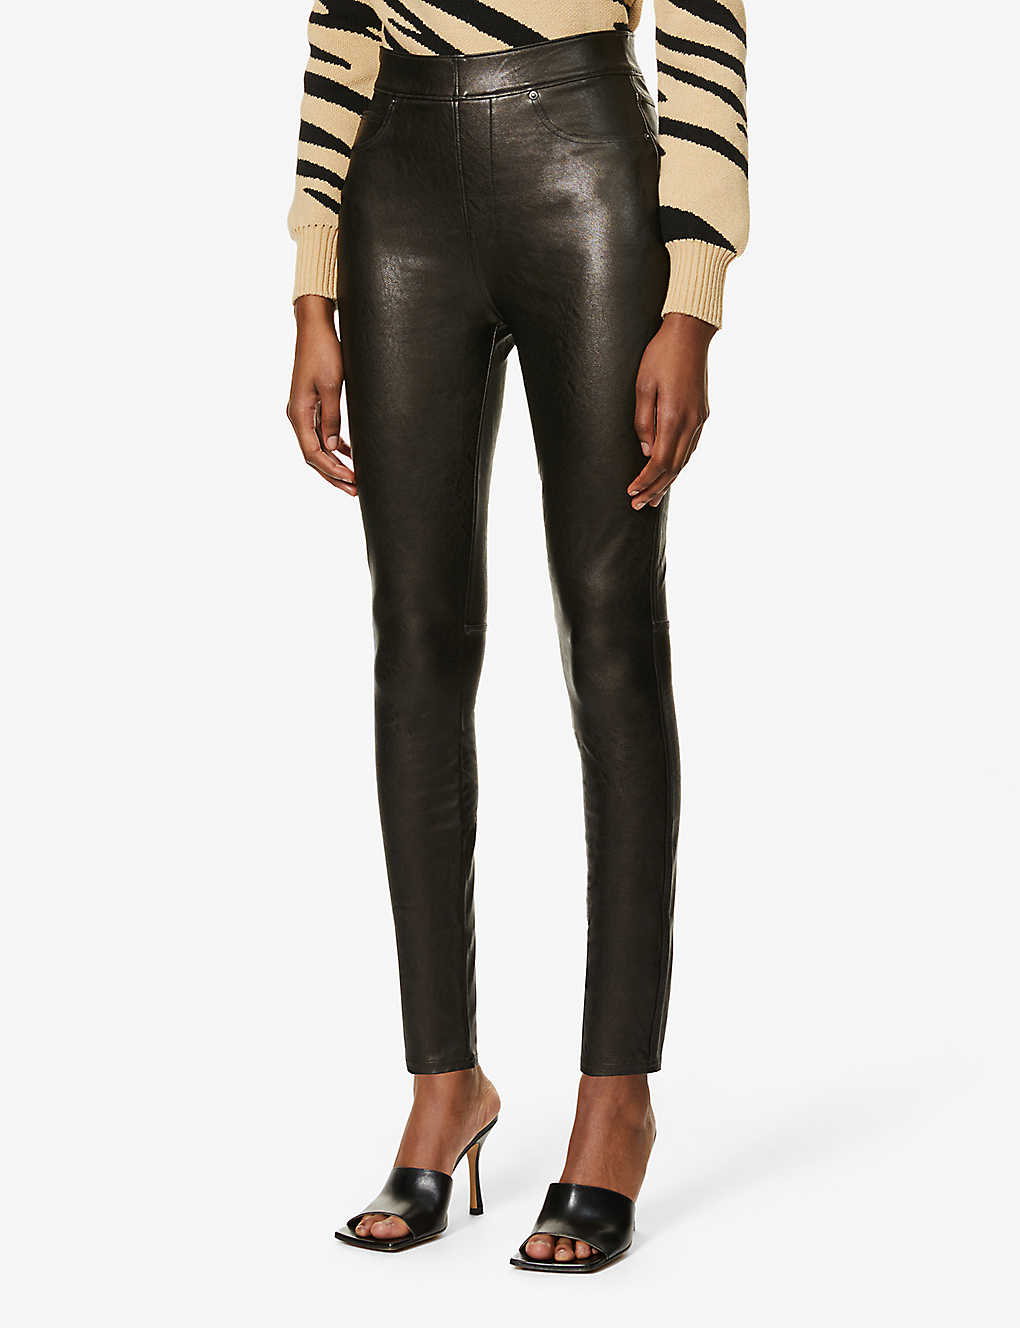 Shop Spanx Women's Black Like Leather Skinny High-rise Faux-leather Trousers